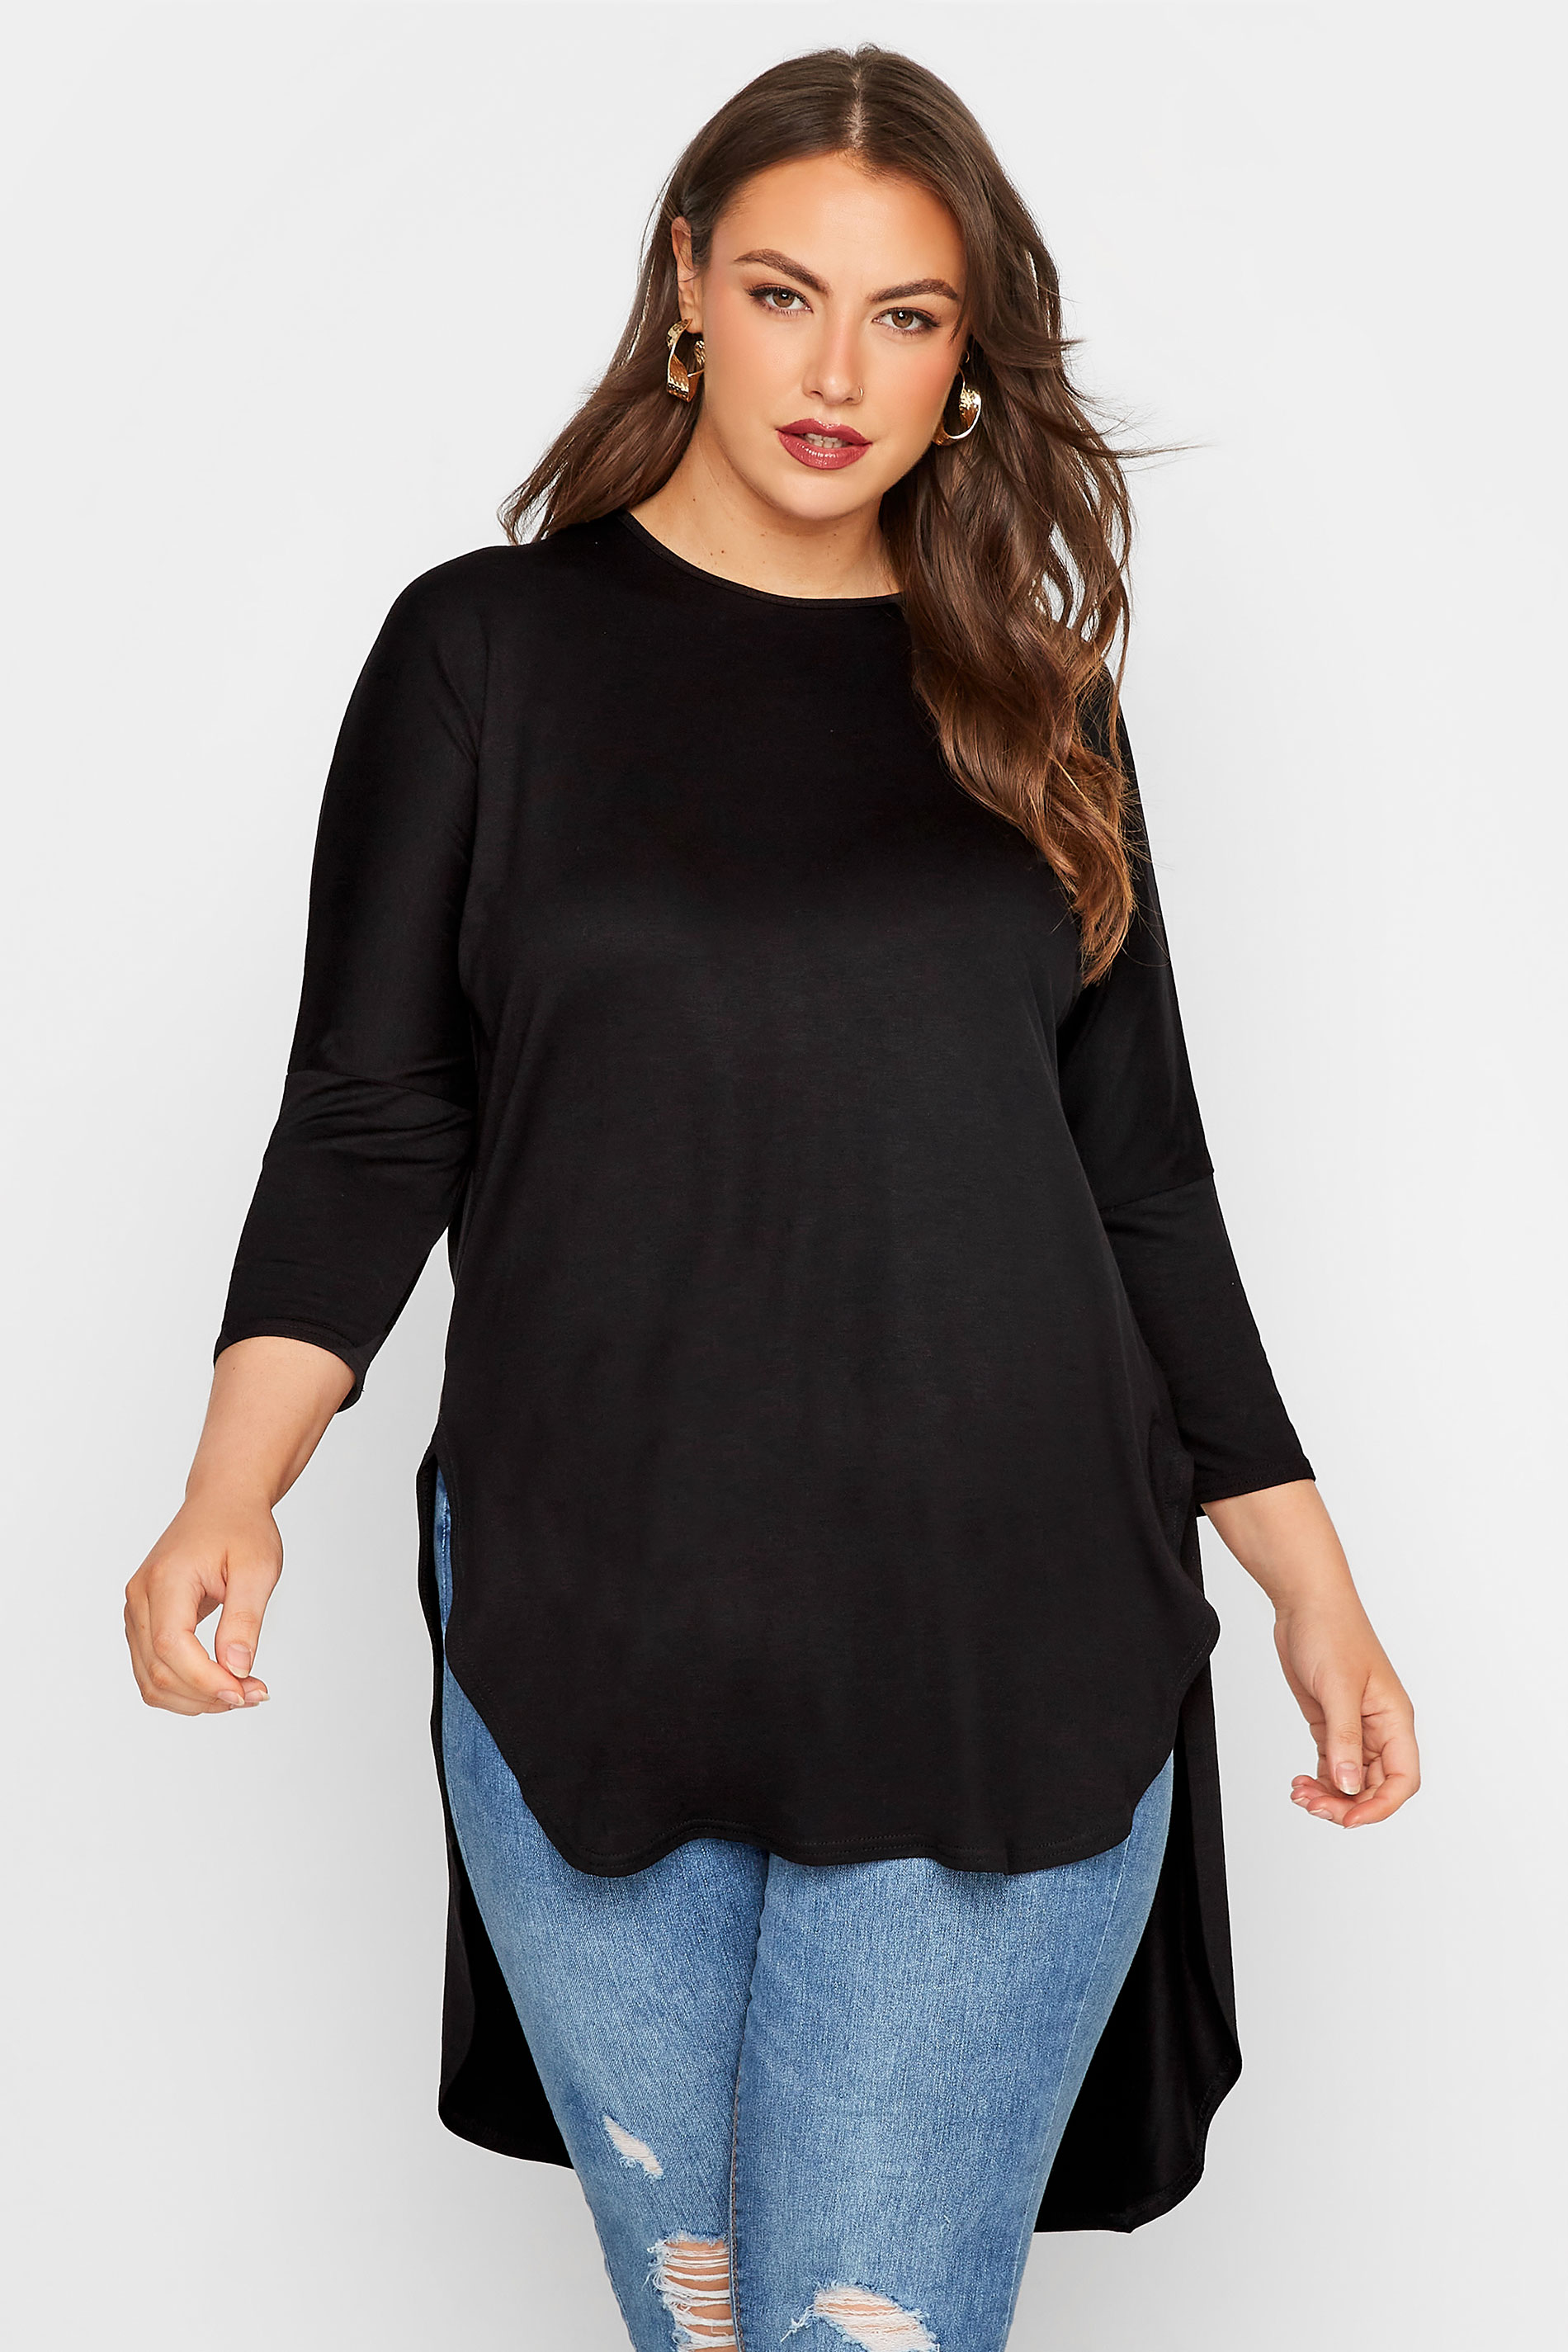 Grande taille  Tops Grande taille  Tops Ourlet Plongeant | LIMITED COLLECTION - T-Shirt Noir Manches Longues Ourlet Plongeant - QF14236